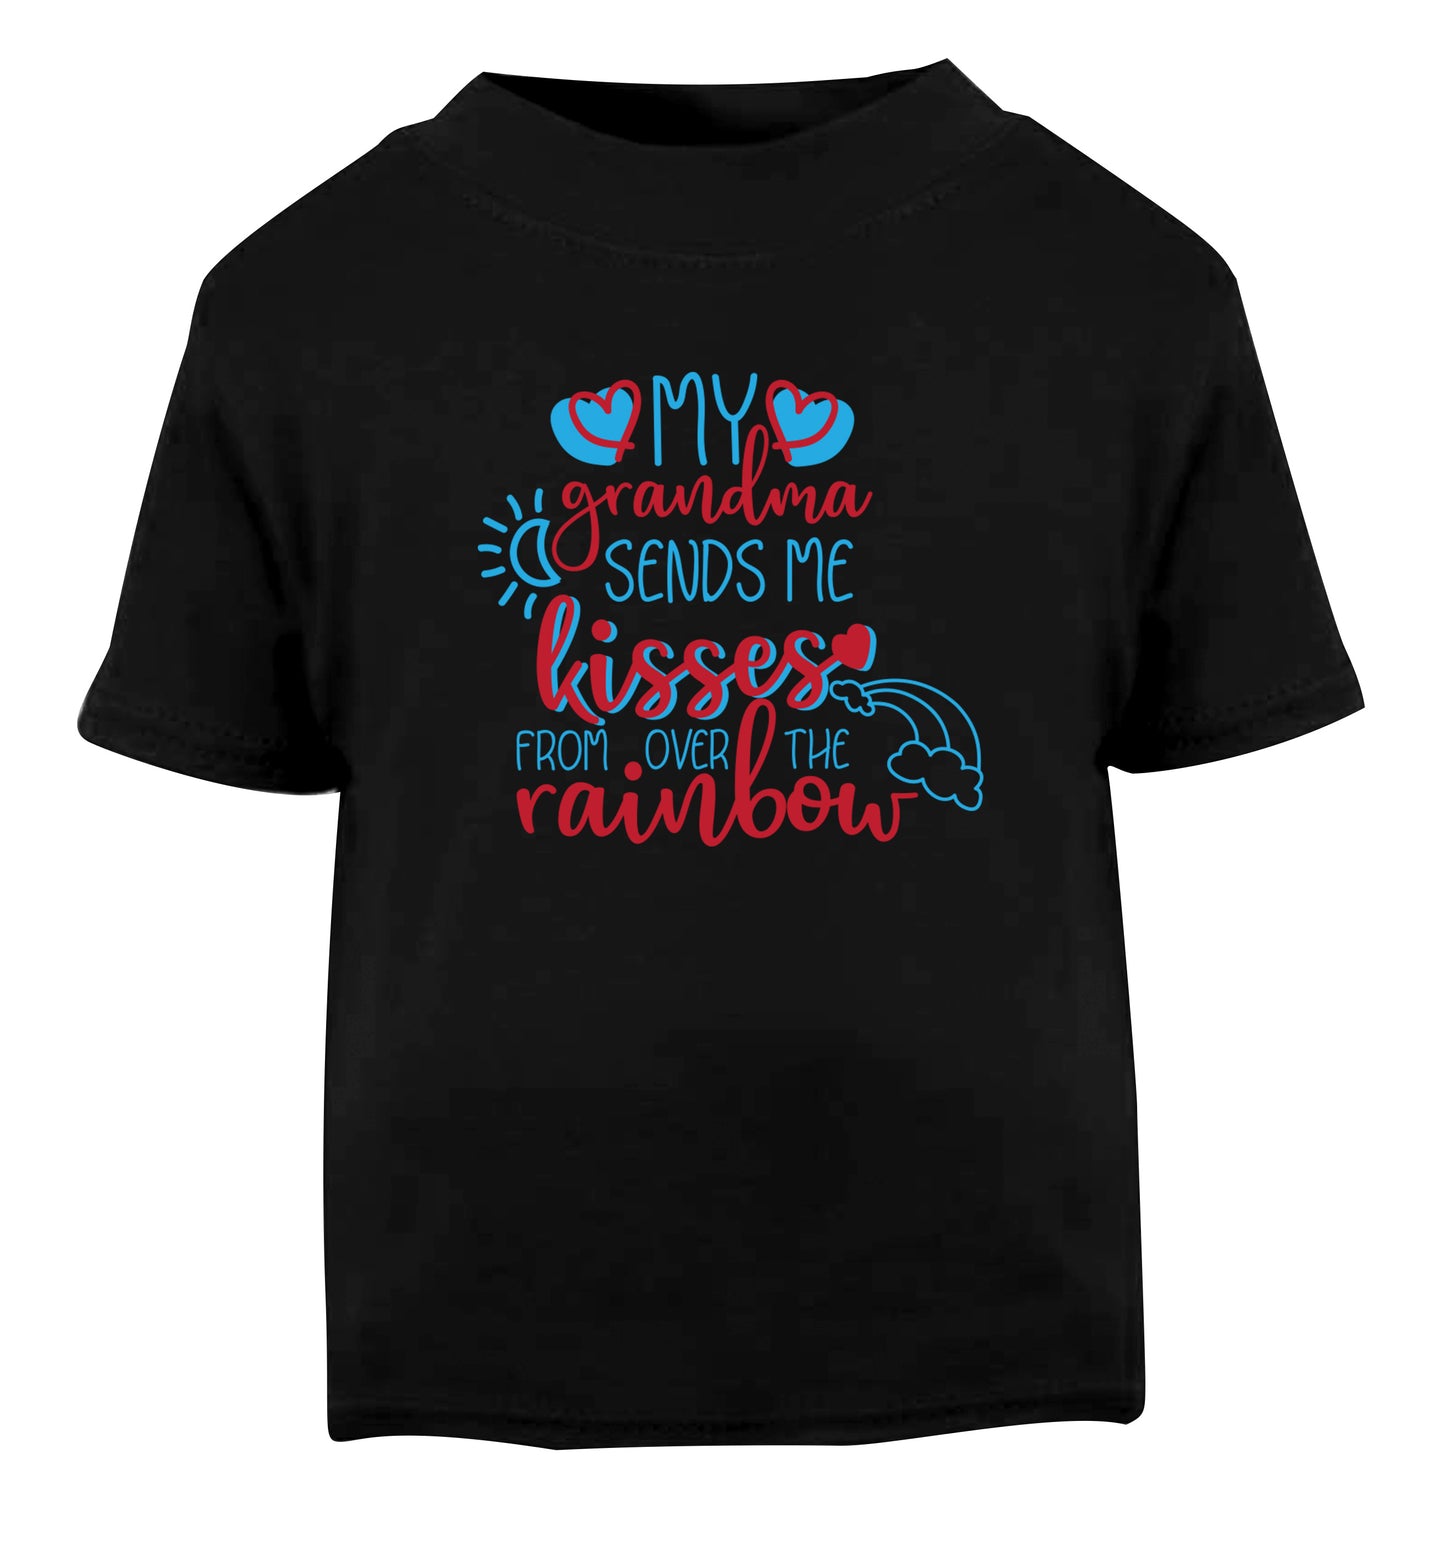 My grandma sends me kisses from over the rainbow Black Baby Toddler Tshirt 2 years